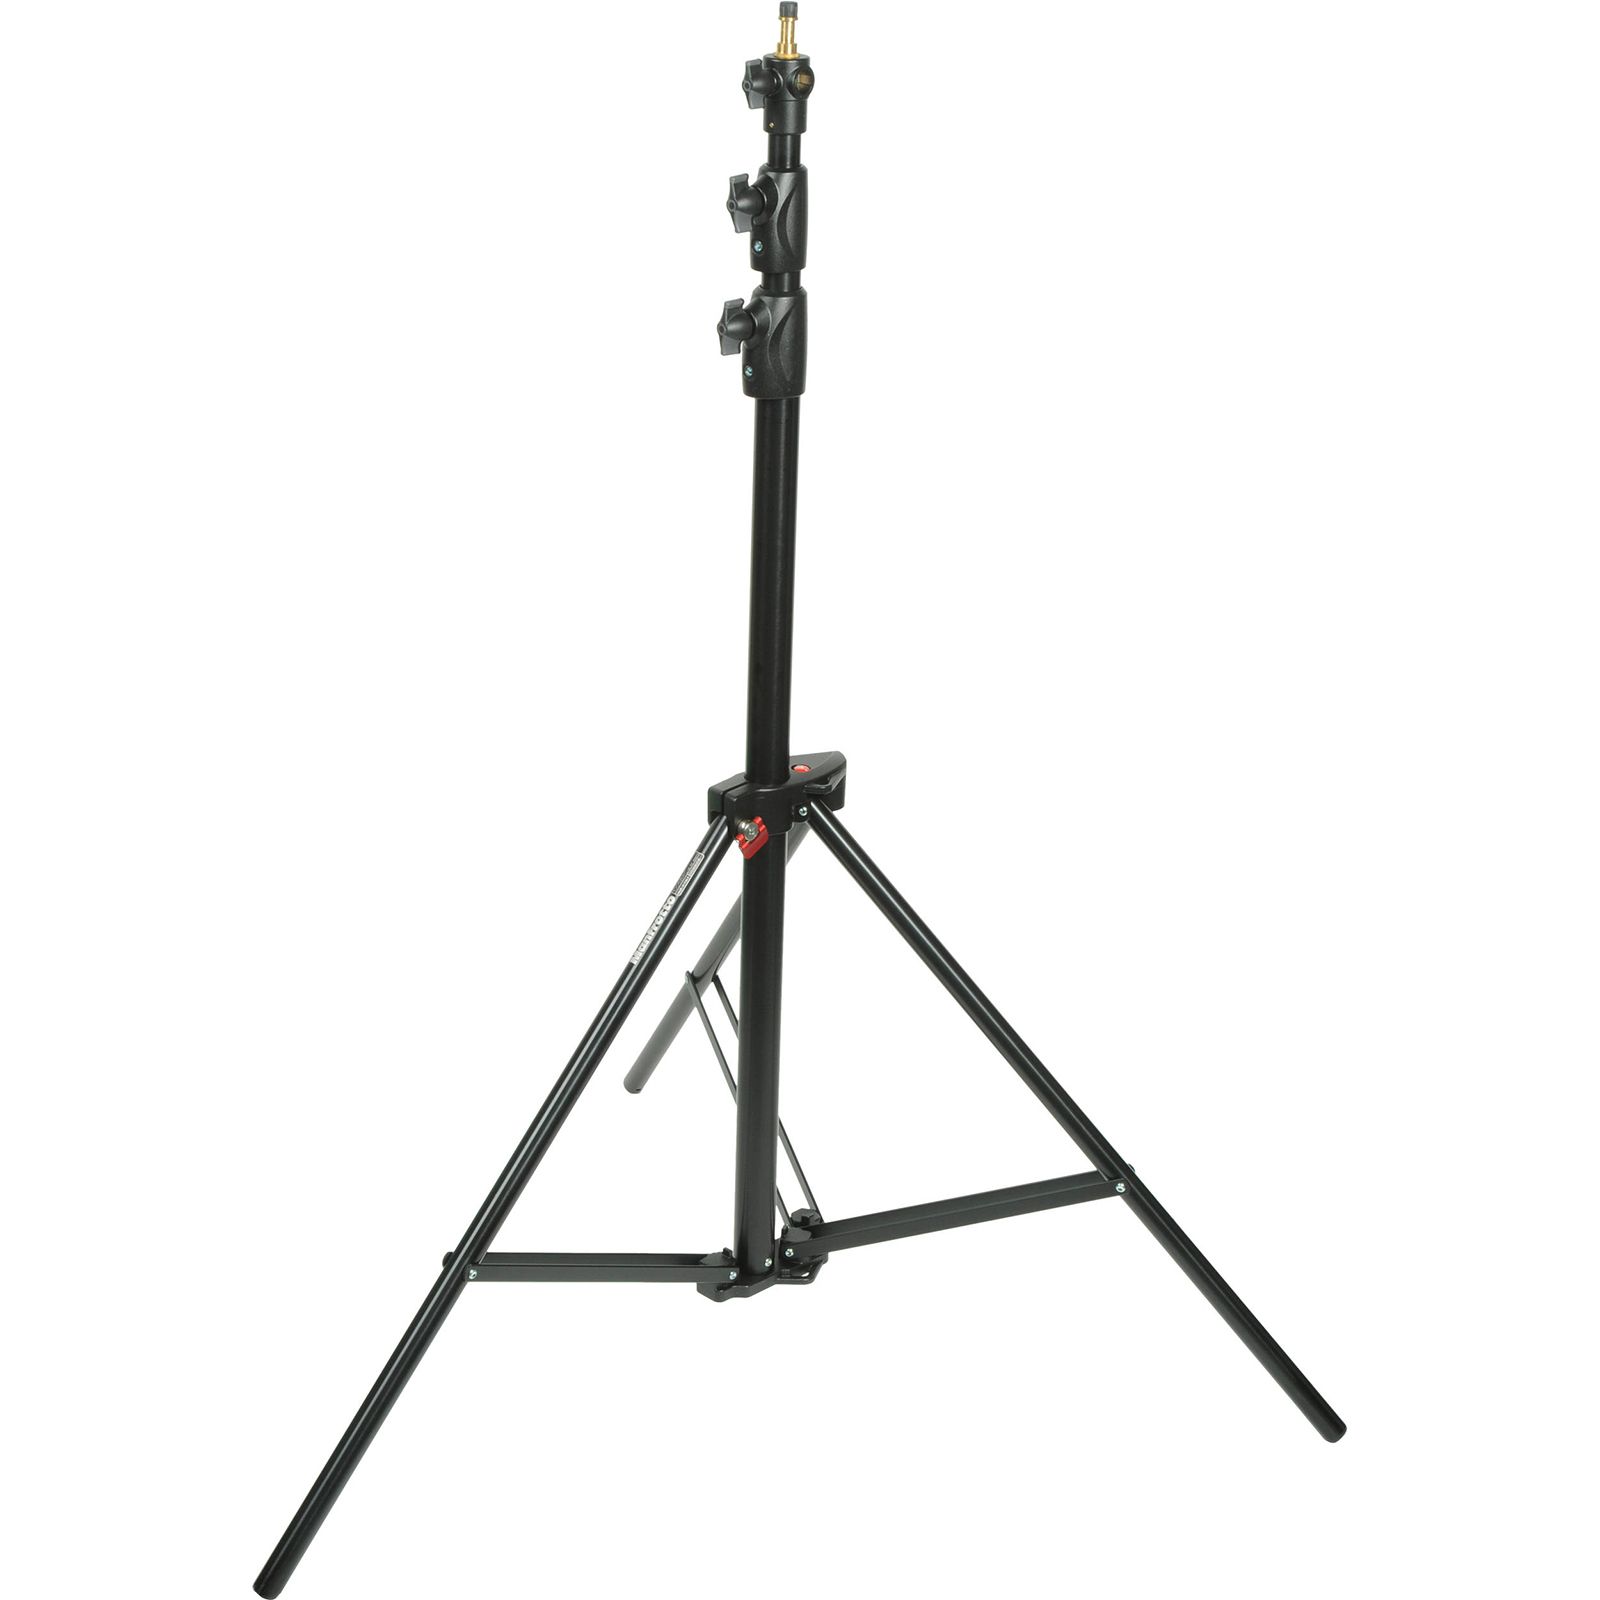 MANFROTTO - Alu ranker air-cushioned light stand quick stack 3-pack